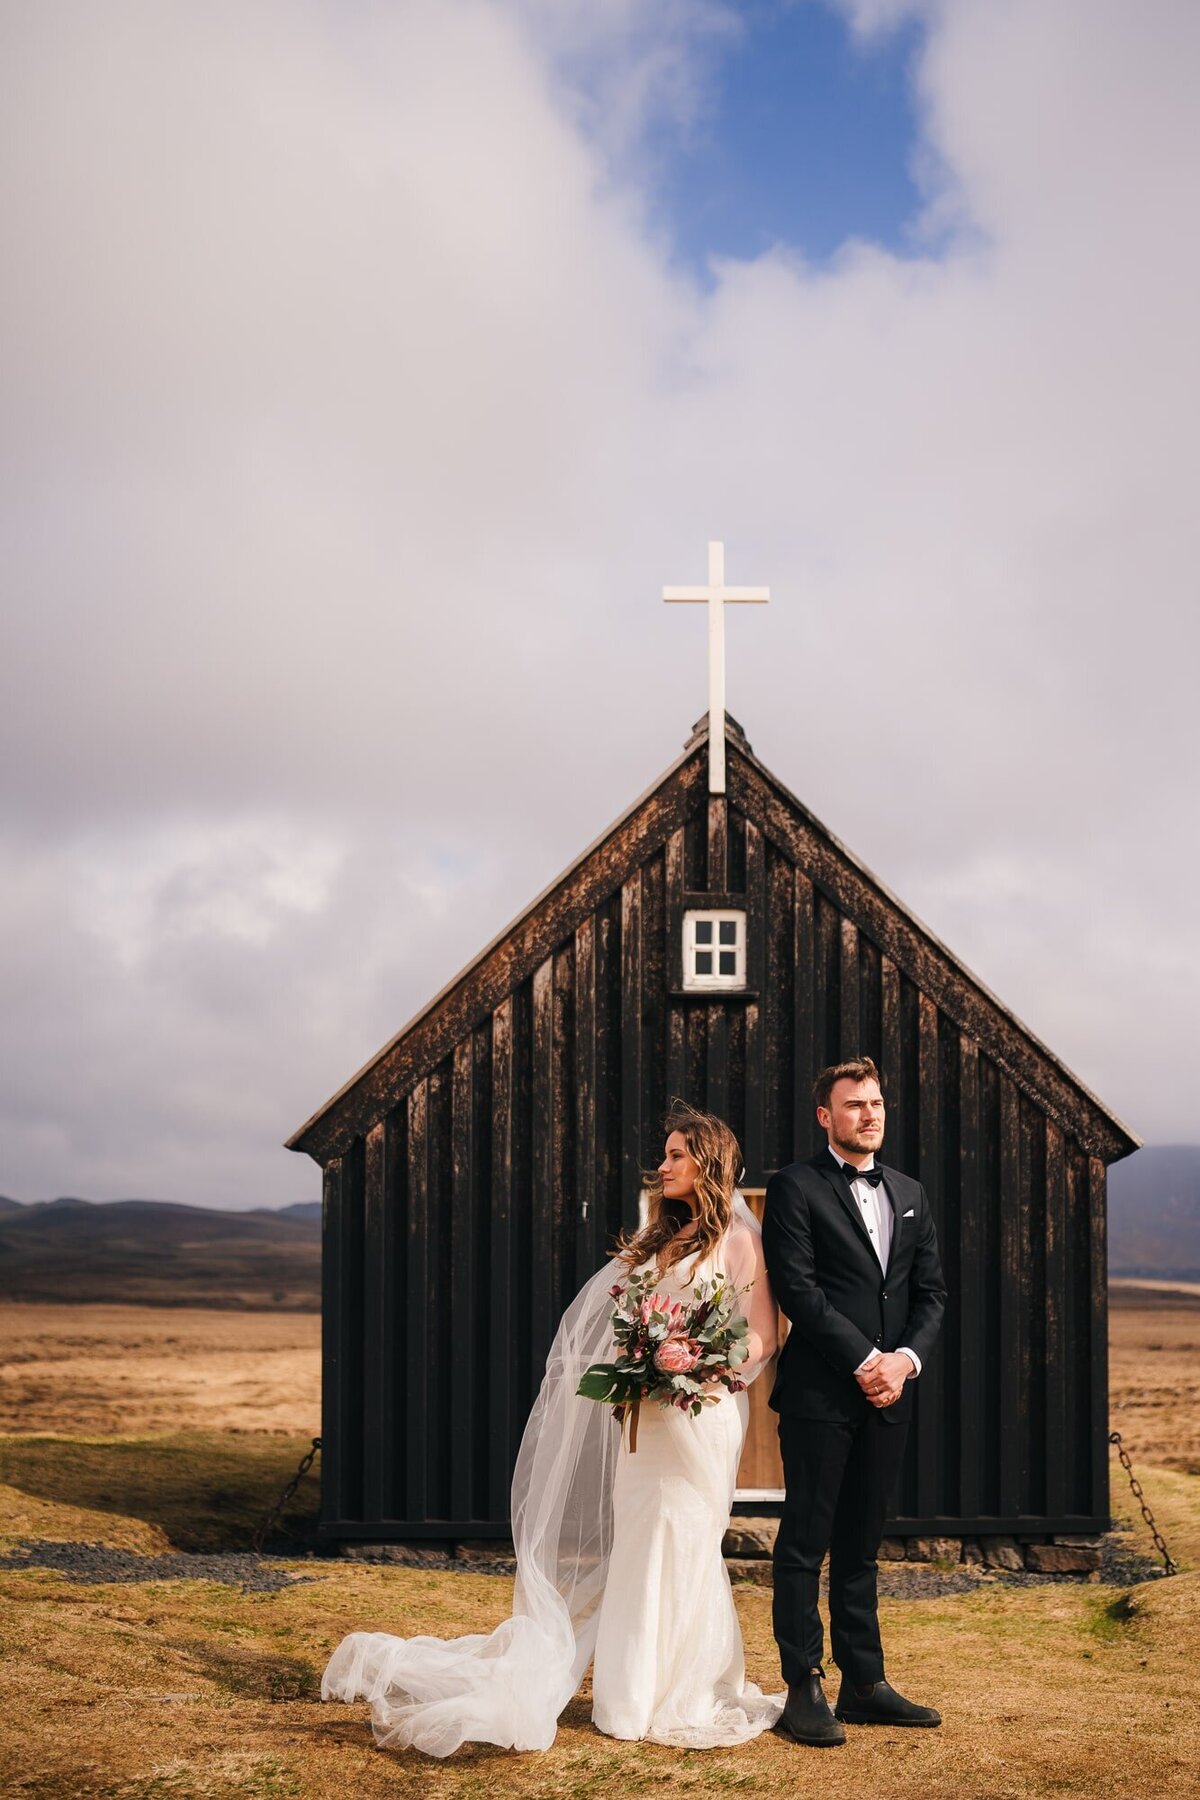 This couple stands facing opposite horizons, a quaint Icelandic church as their silent witness, surrounded by the breathtaking scenery that adds to the magic of their love story.